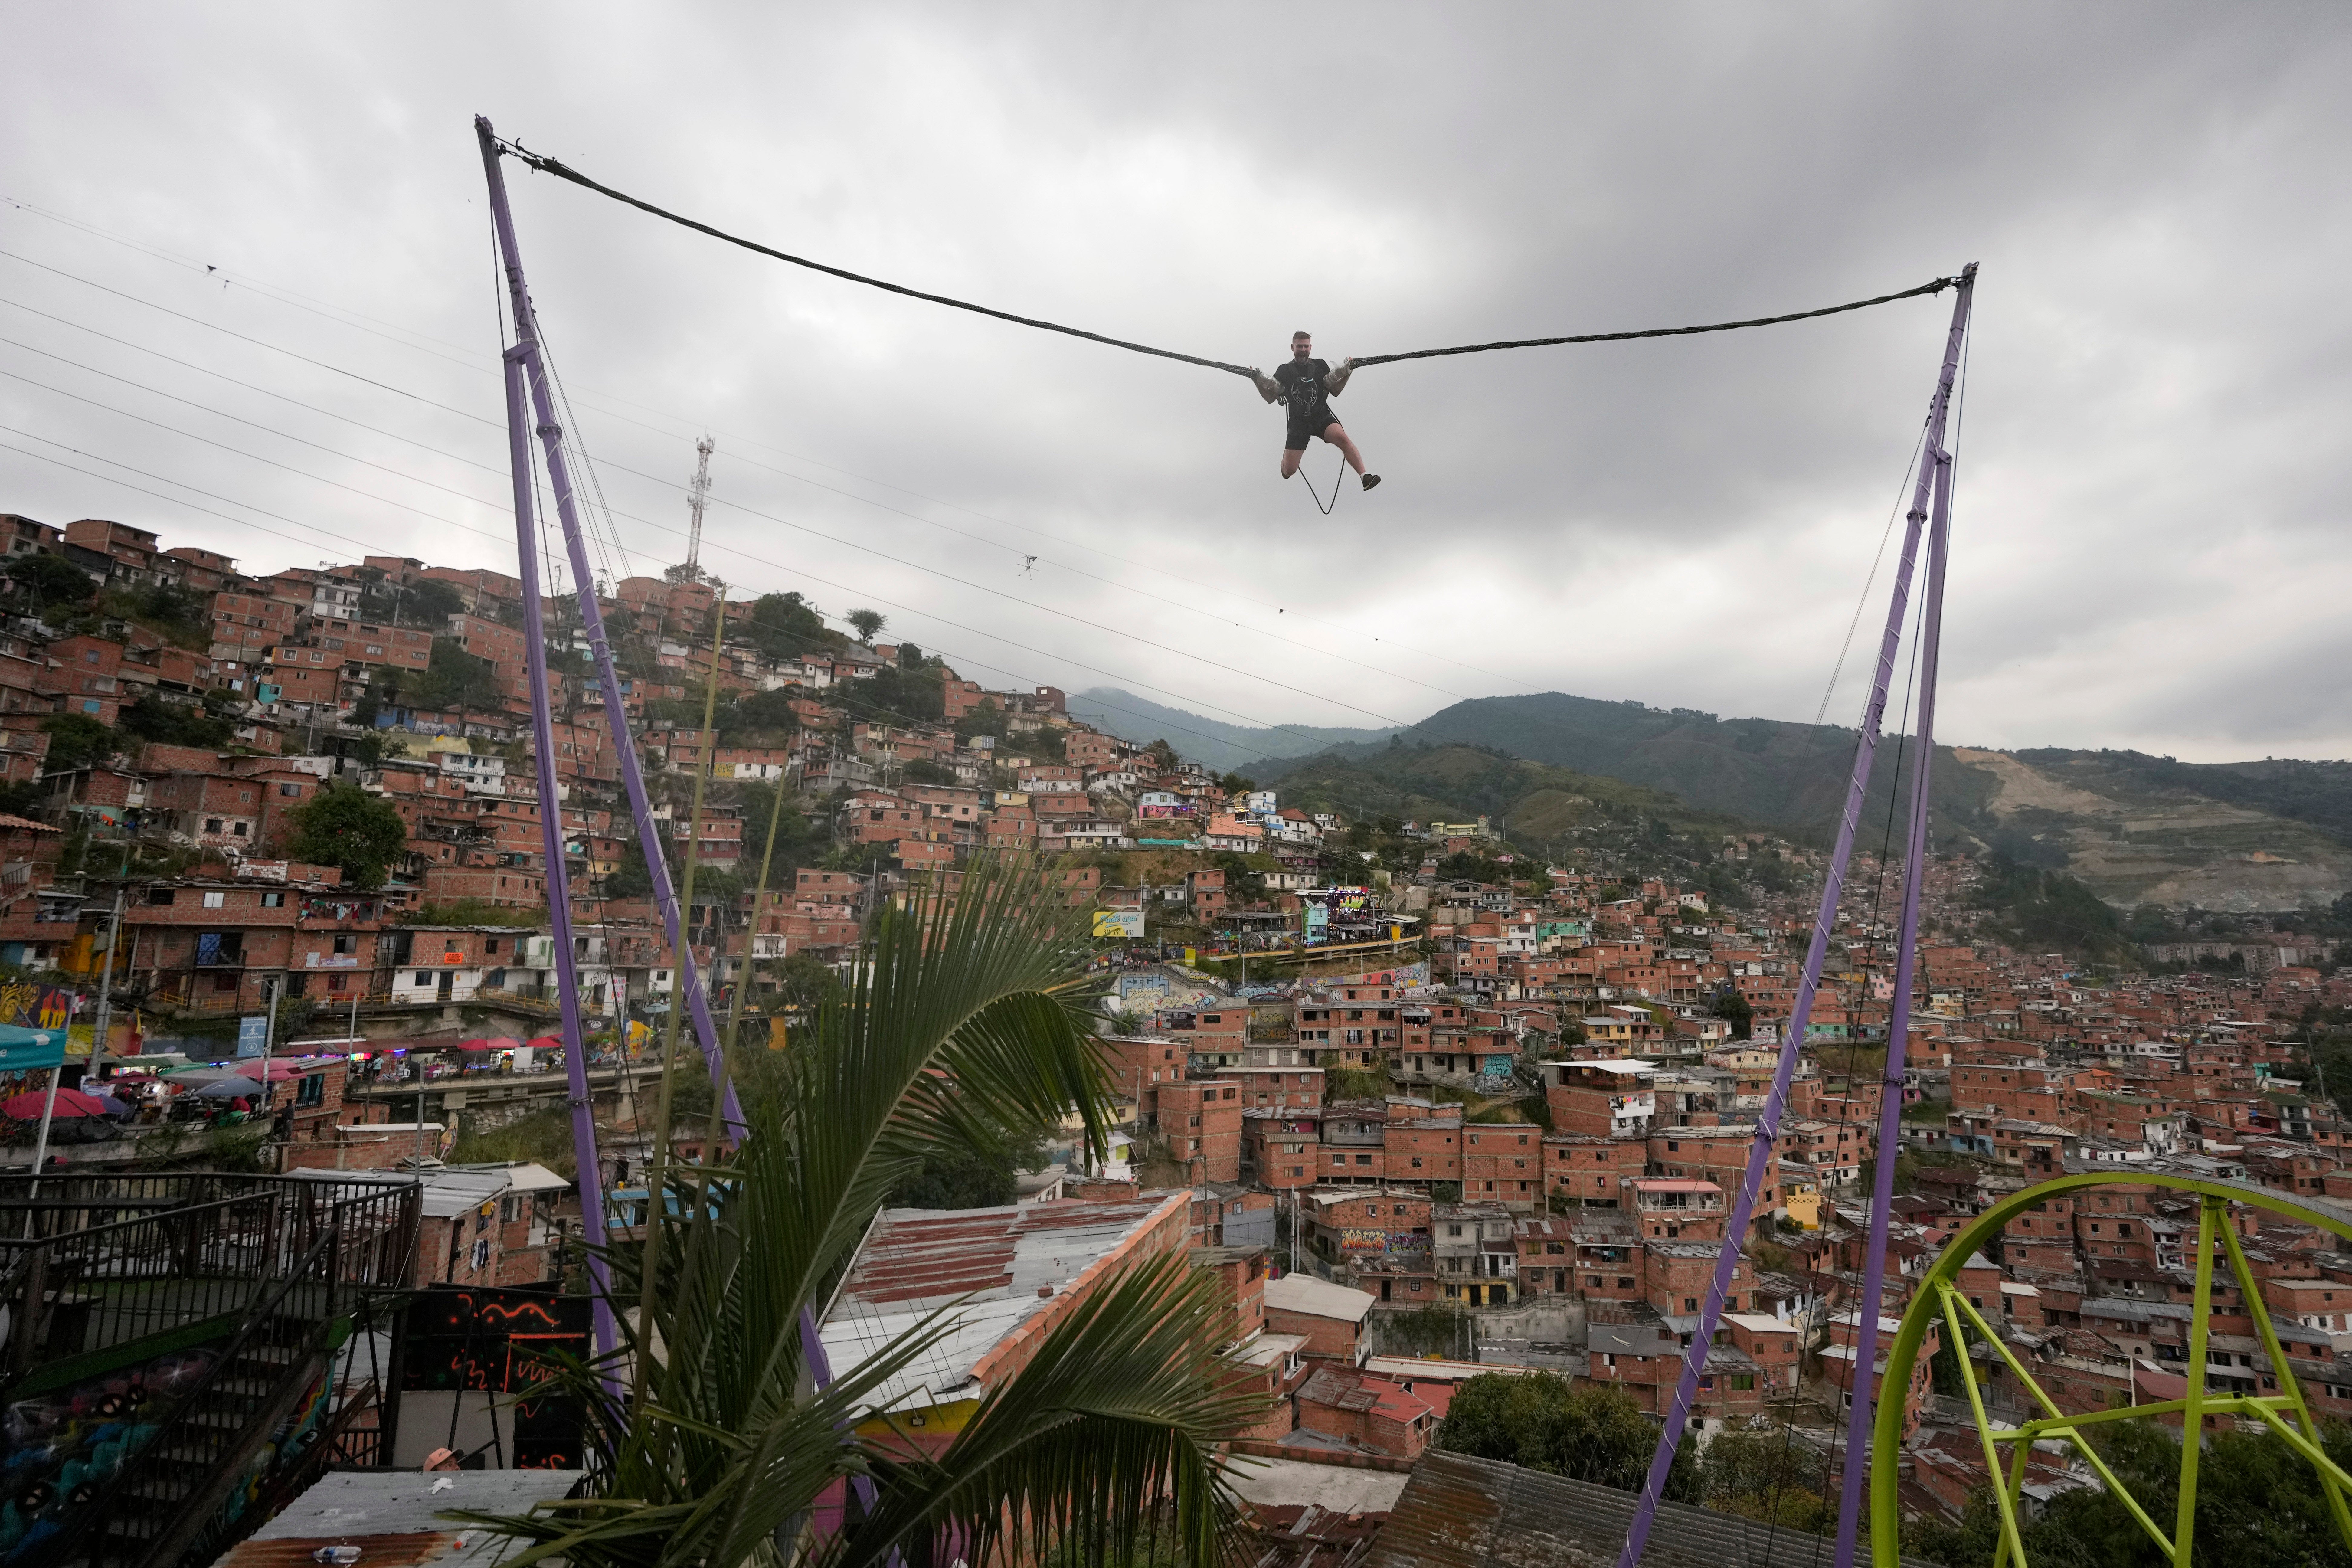 A tourist rides a bungee jump in the Comuna 13 neighborhood of Medellin, Colombia